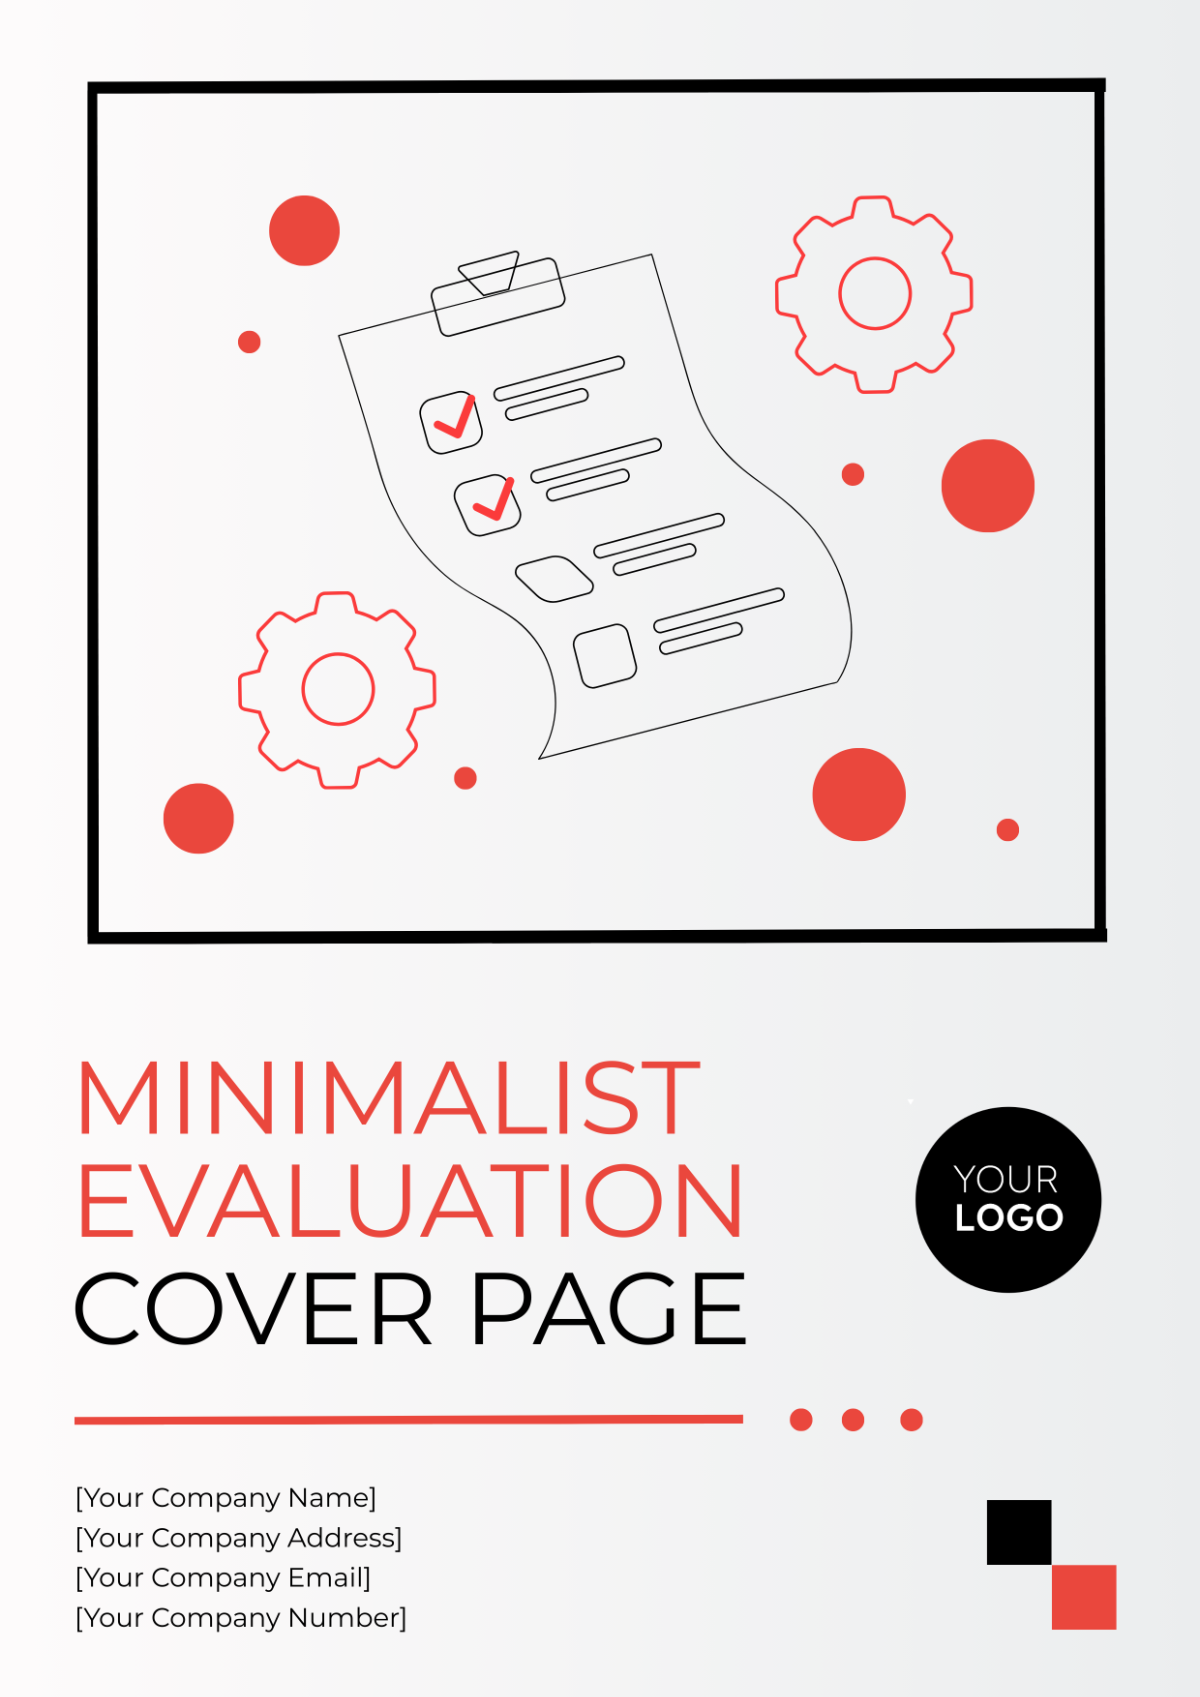 Minimalist Evaluation Cover Page